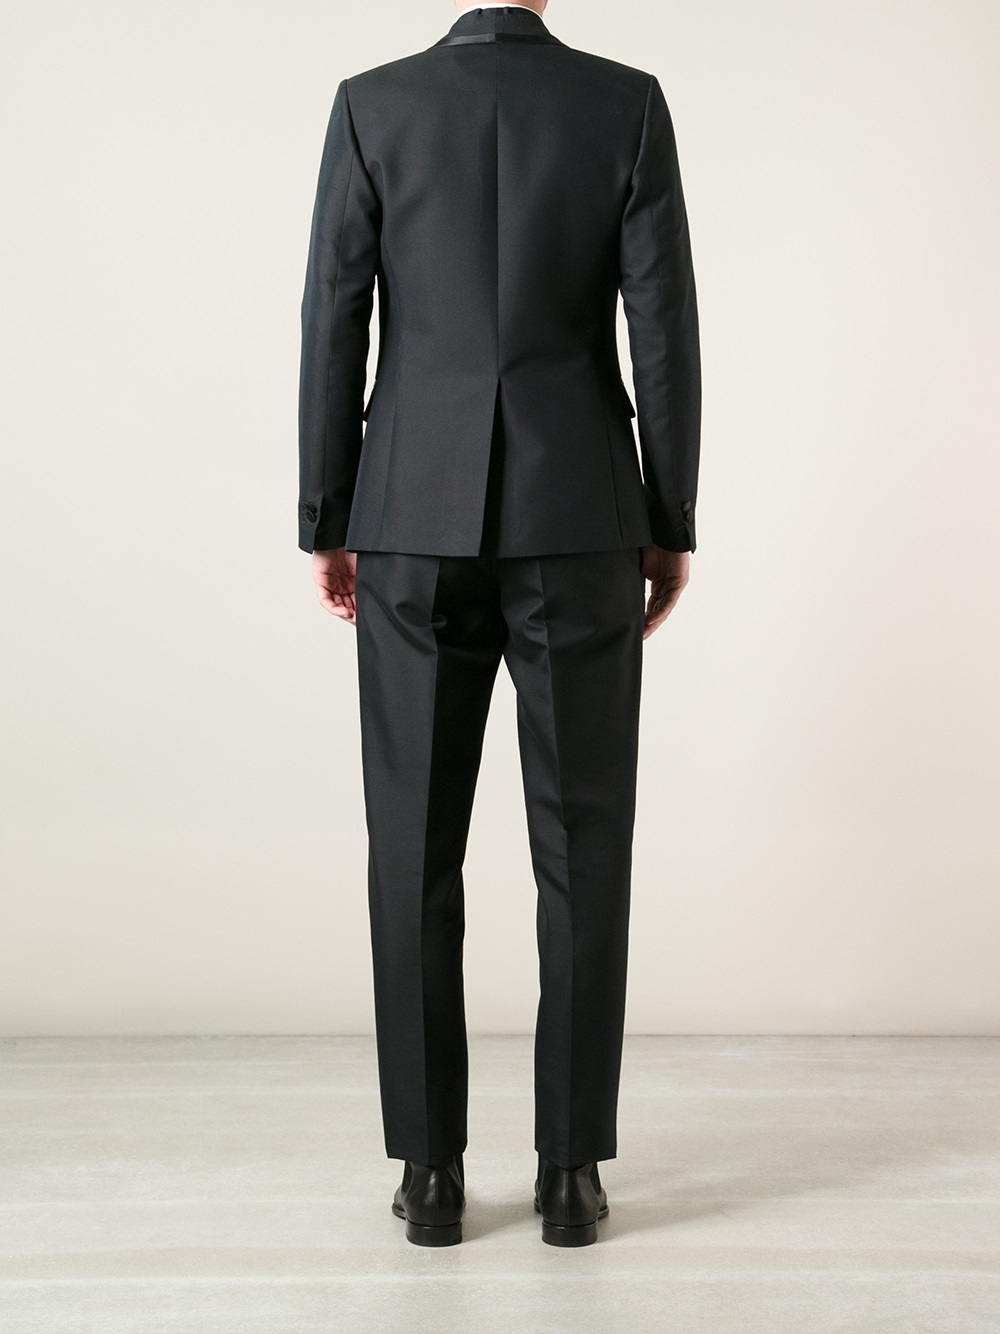 DSquared² Classic Smoking Suit in Black for Men - Lyst